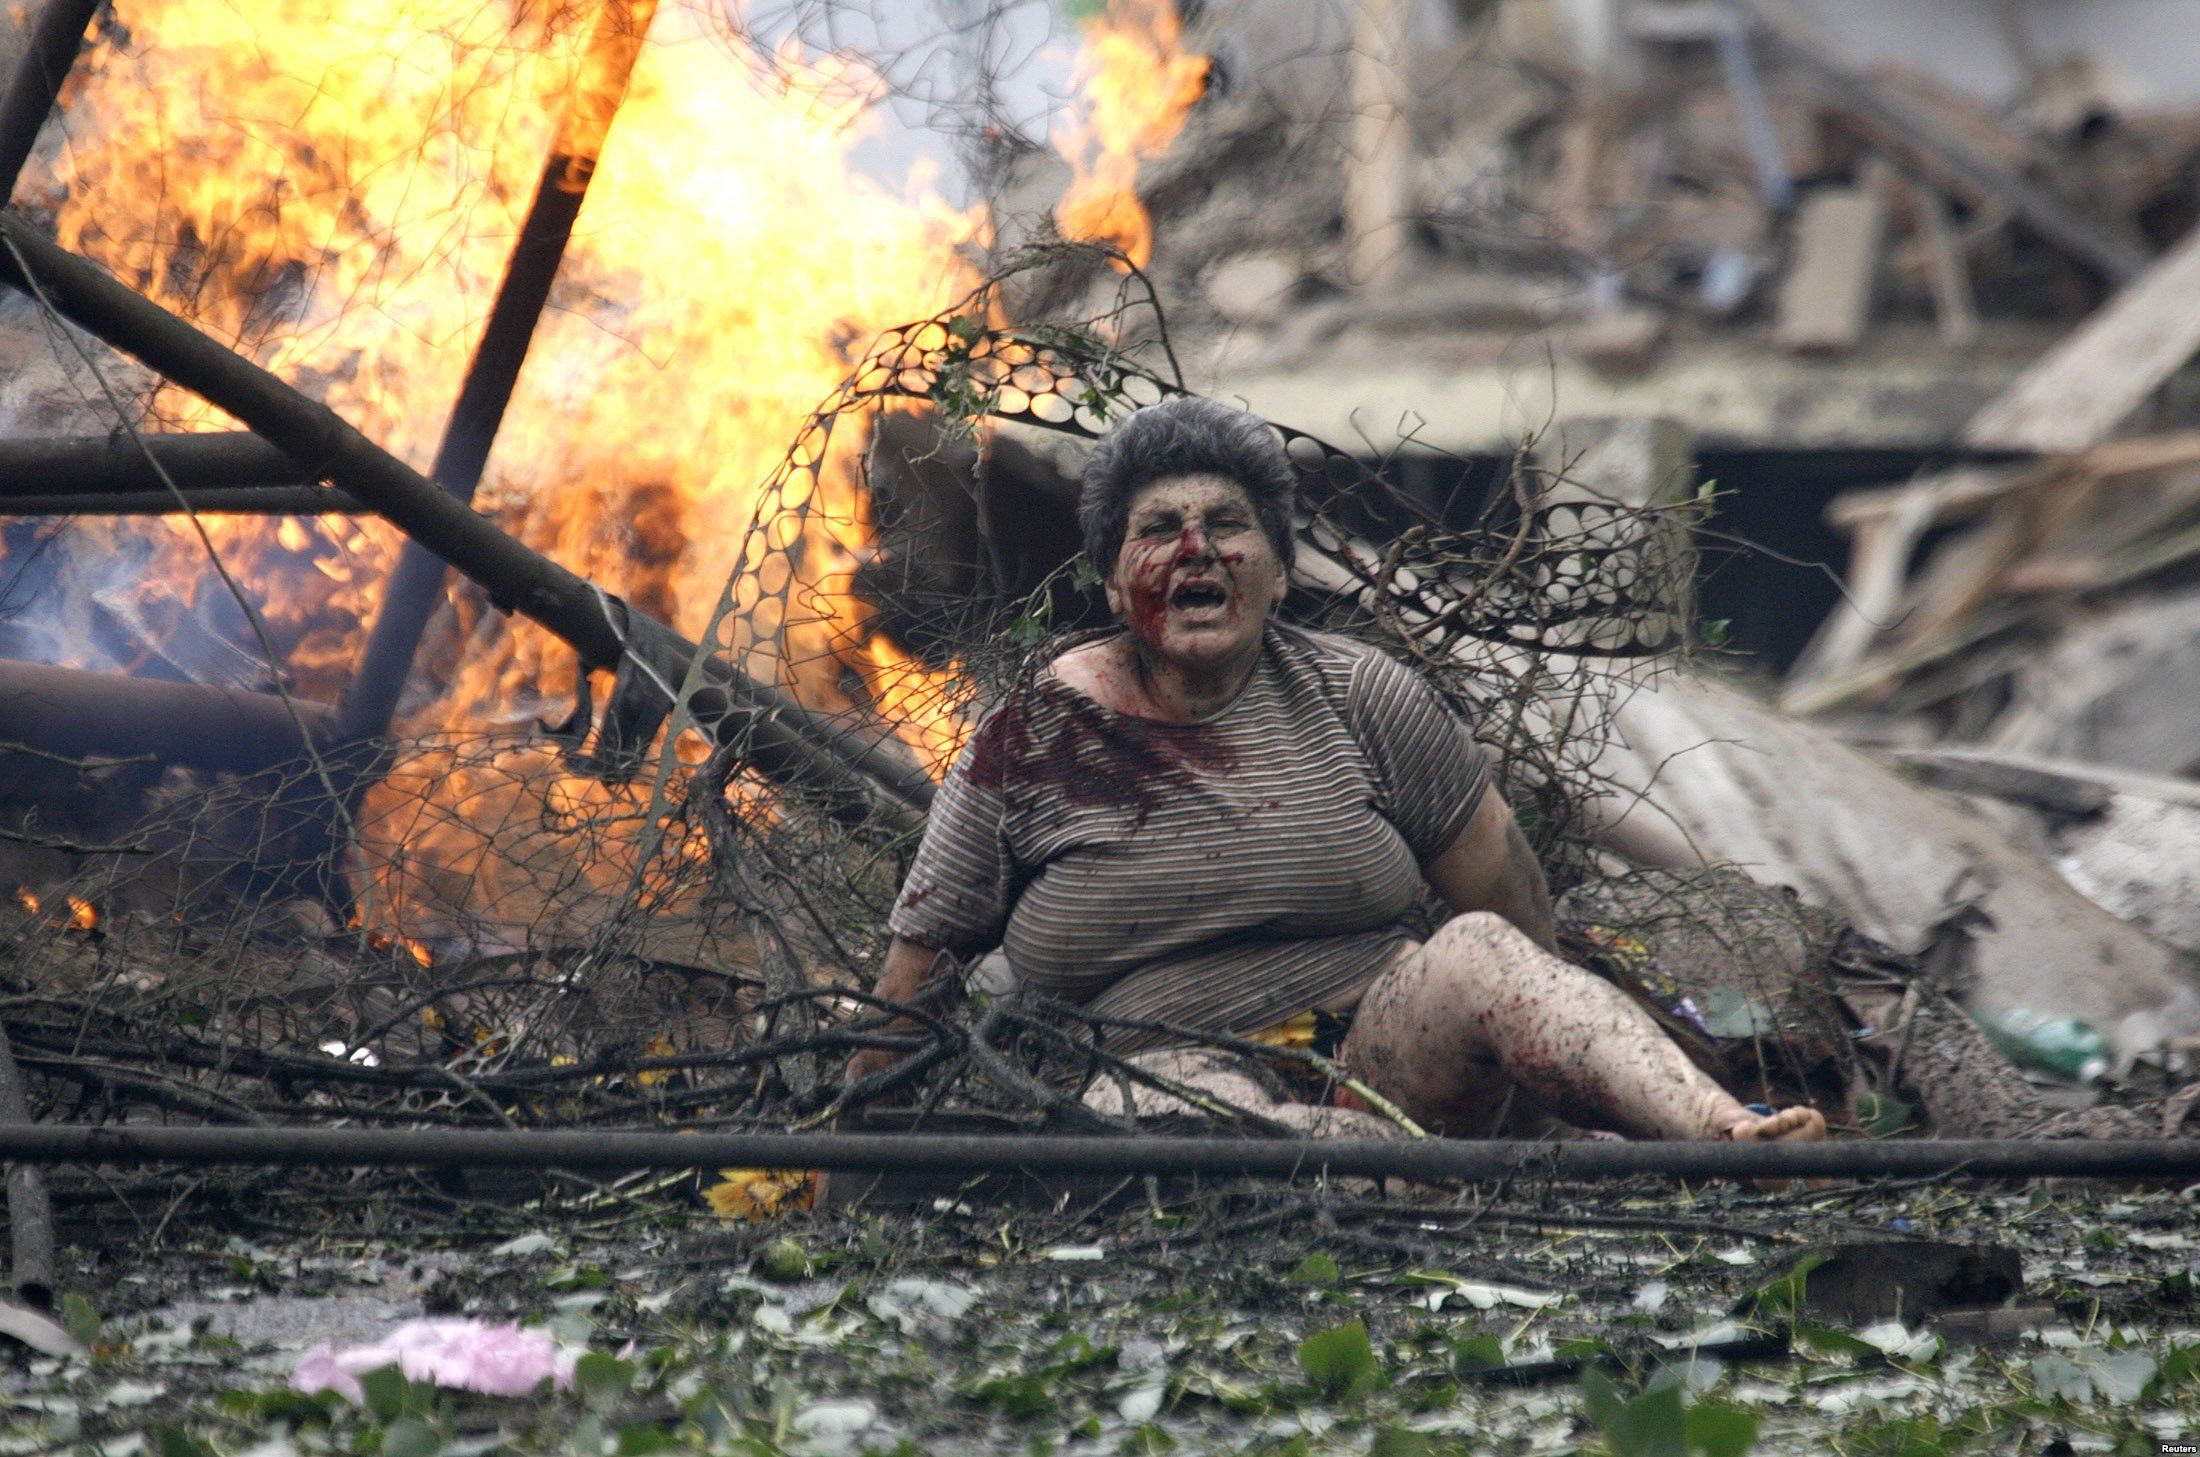 Russian invasion in Georgia in August 2008. A wounded Georgian woman in the town of Gori, 80 km (50 miles) from Tbilisi. (Image: Reuters)